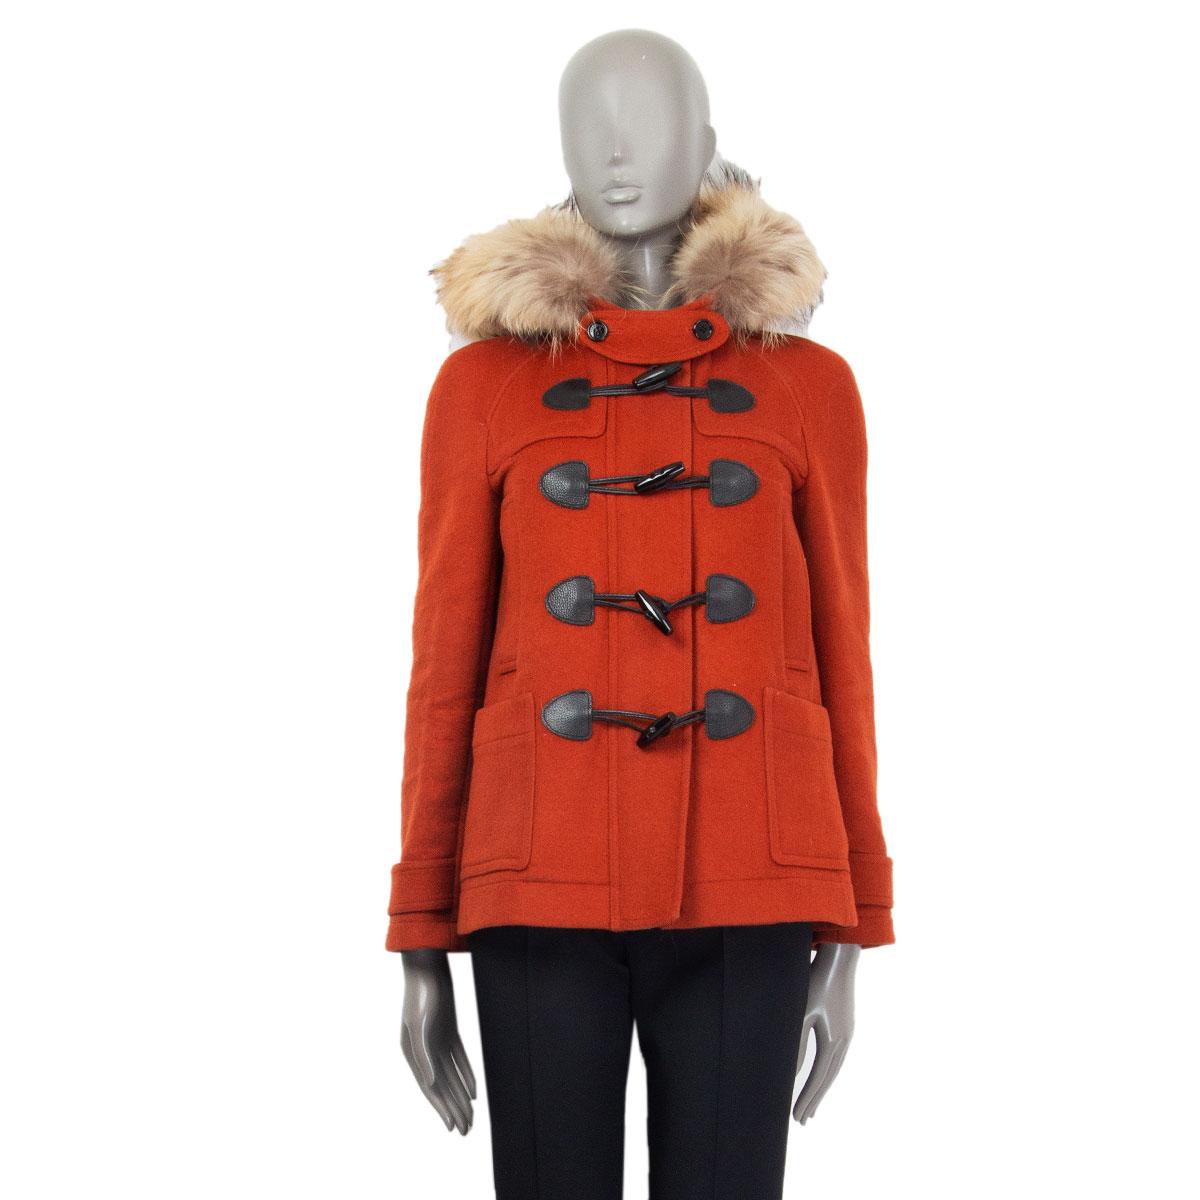 authentic Burberry Brit 'Yorkdale' duffle coat in rust wool (100%) with a hooded asiatic raccoon fur (100%) trim and with two slit pockets on the chest and two flat pockets on the front. Closes with one button, a concealed zipper and with four